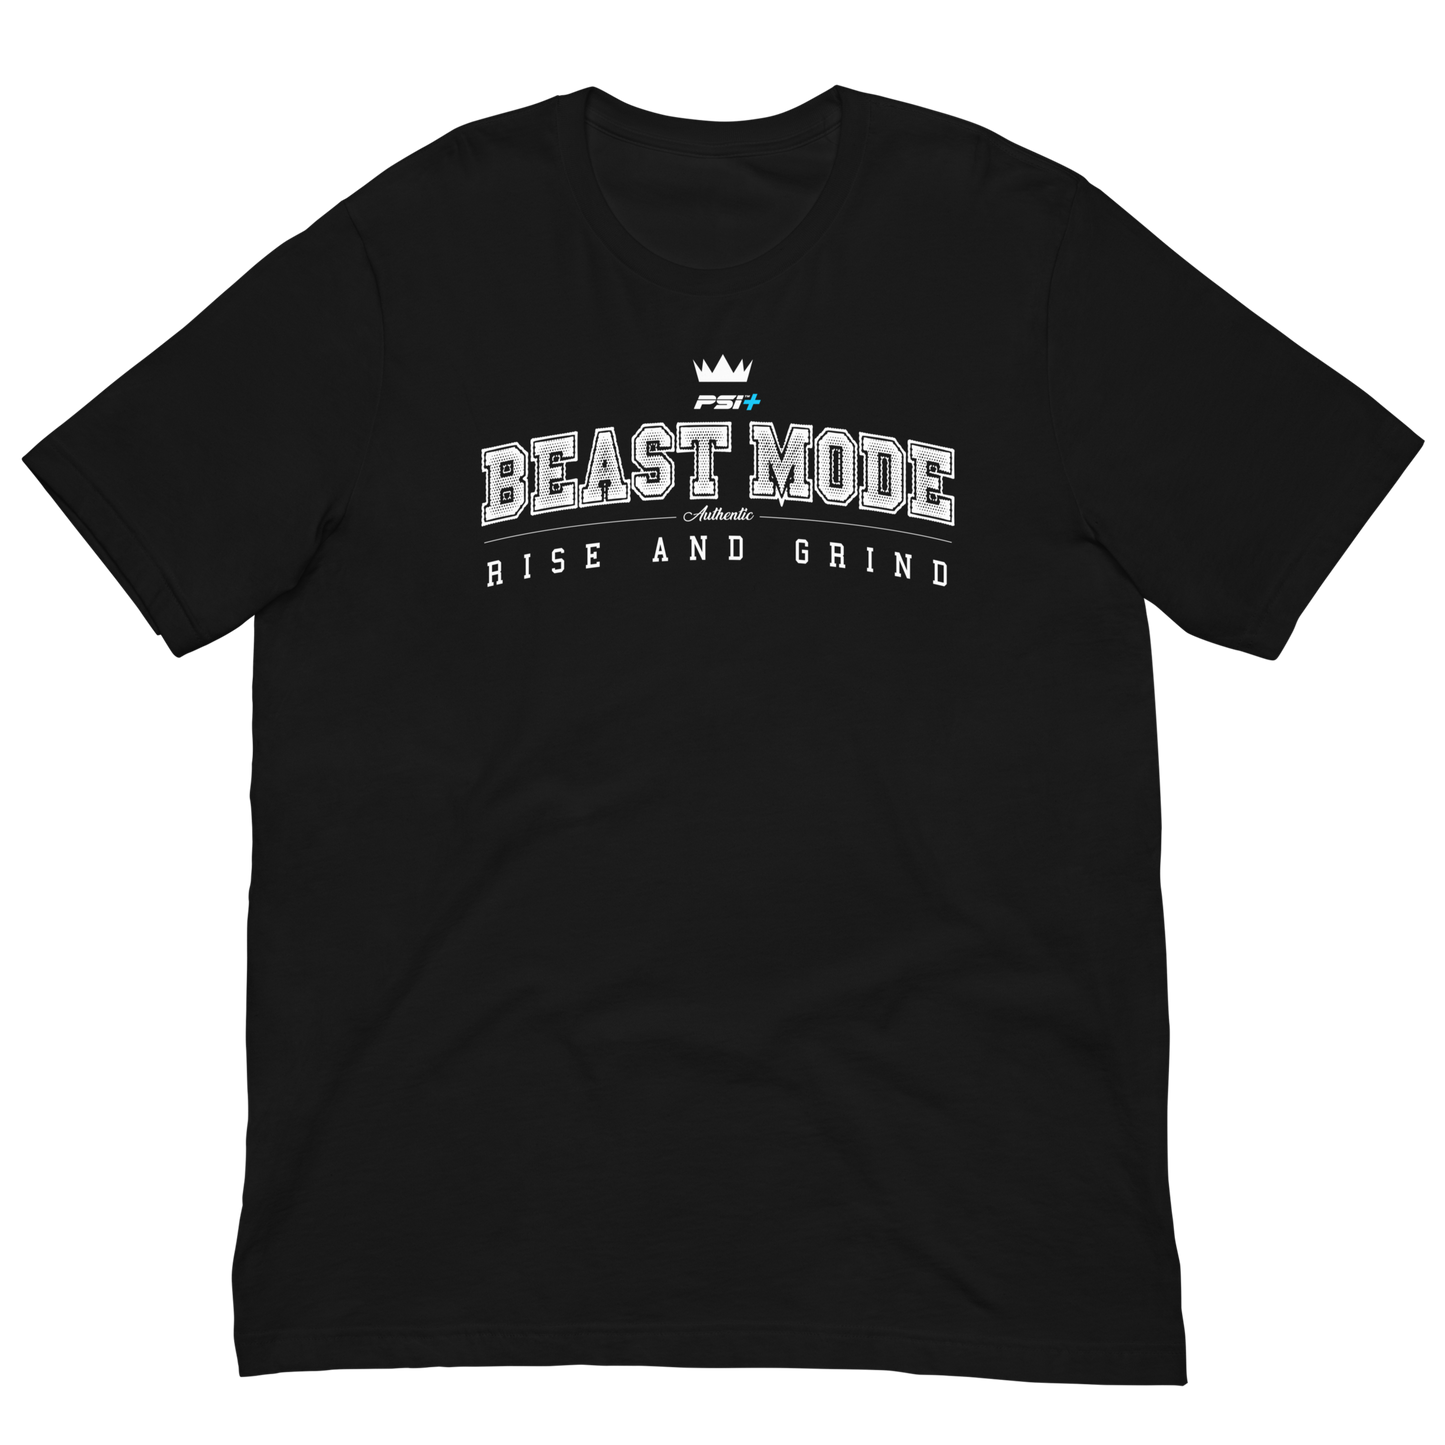 PSI Beast Mode Rise and Grind (Black)